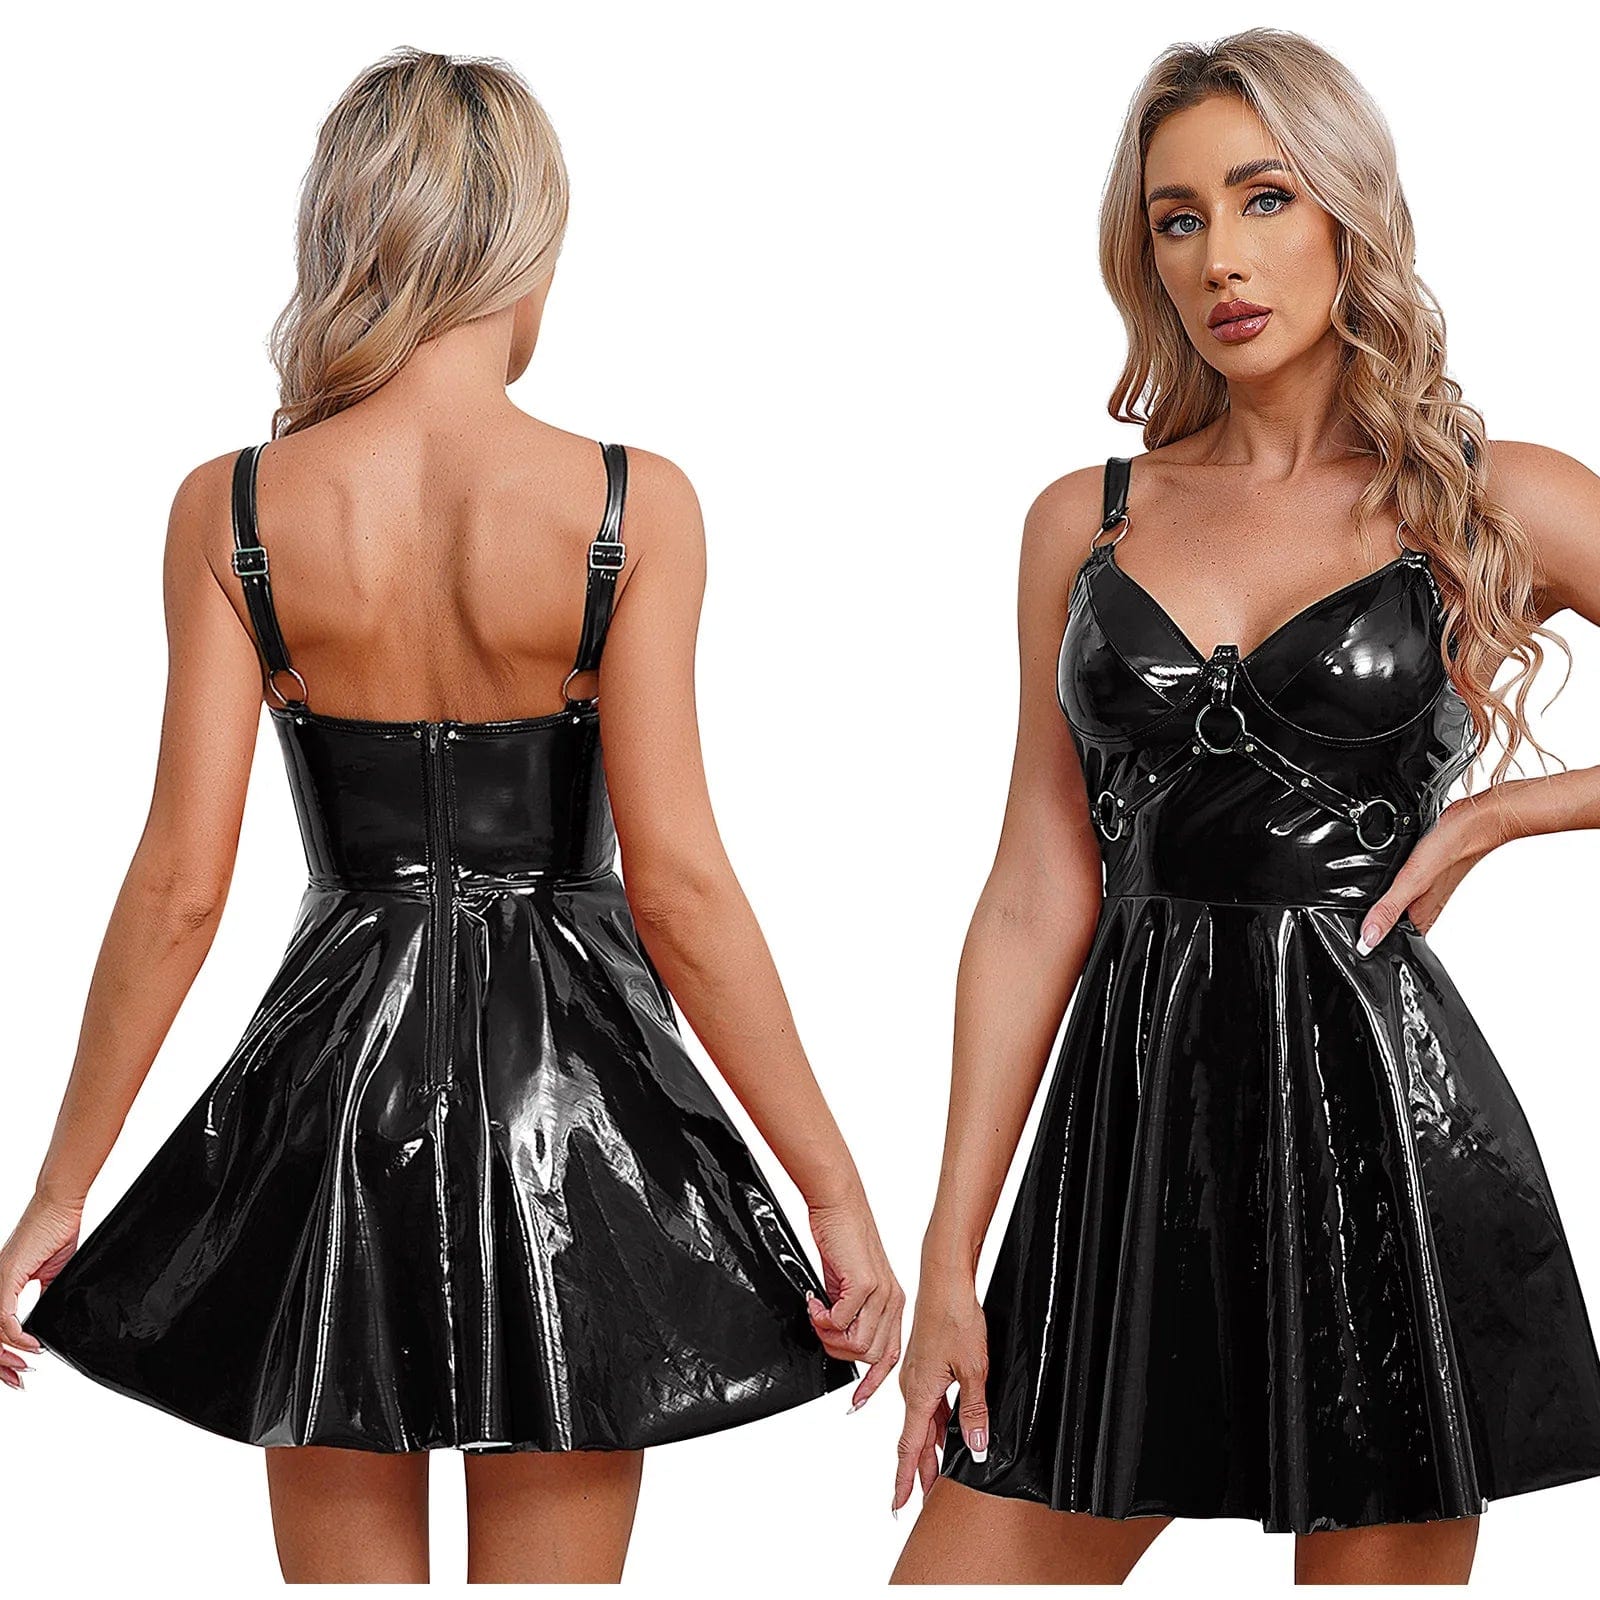 Kinky Cloth Black / S Wet Look O-Ring Strappy Dress